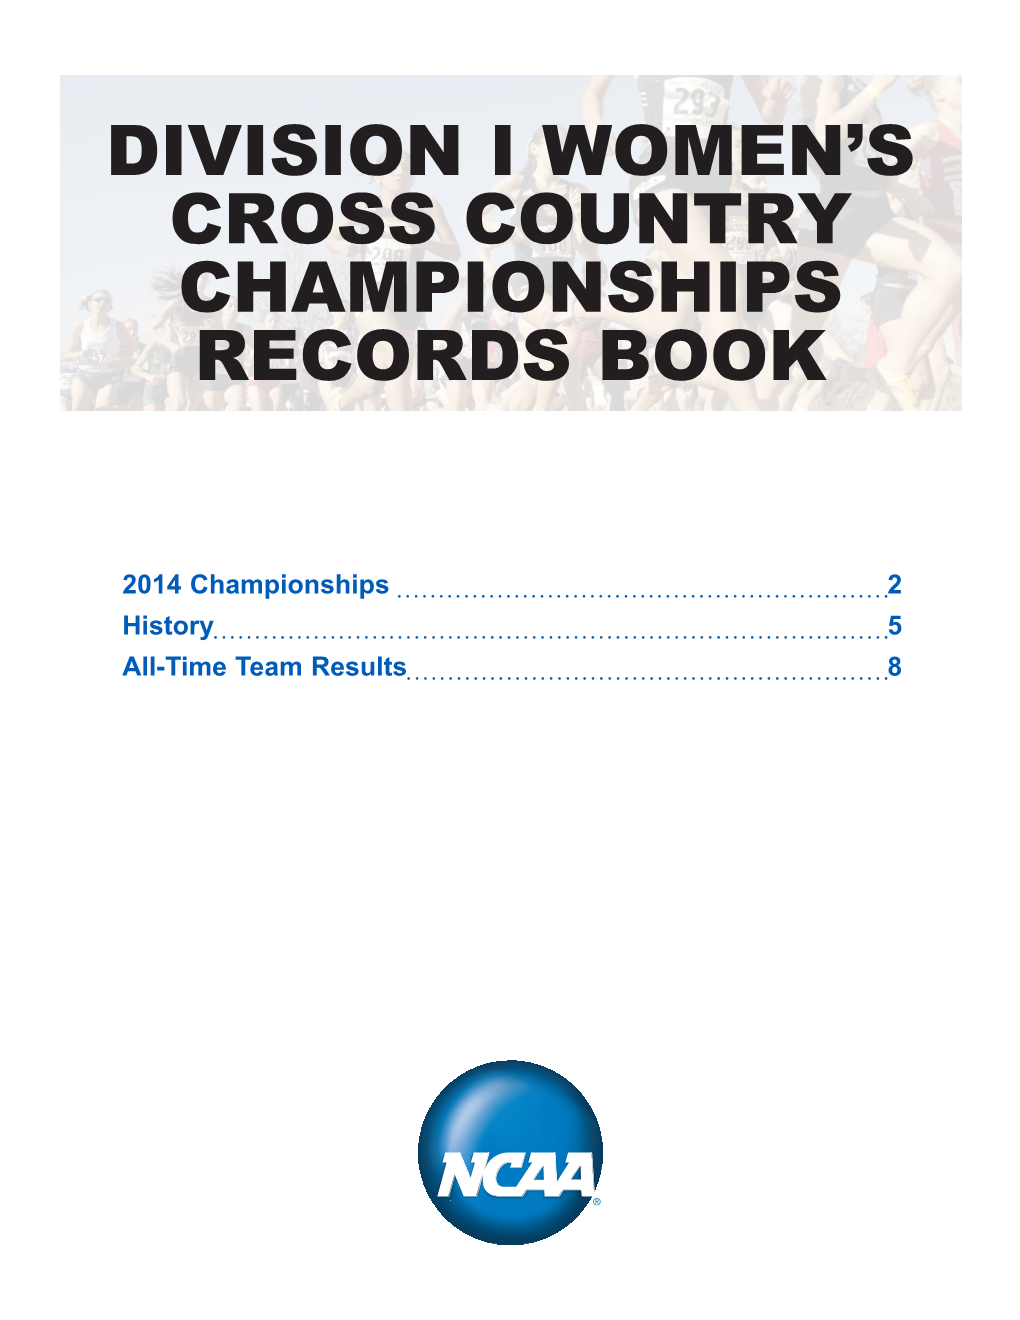 Division I Women's Cross Country Championships Records Book